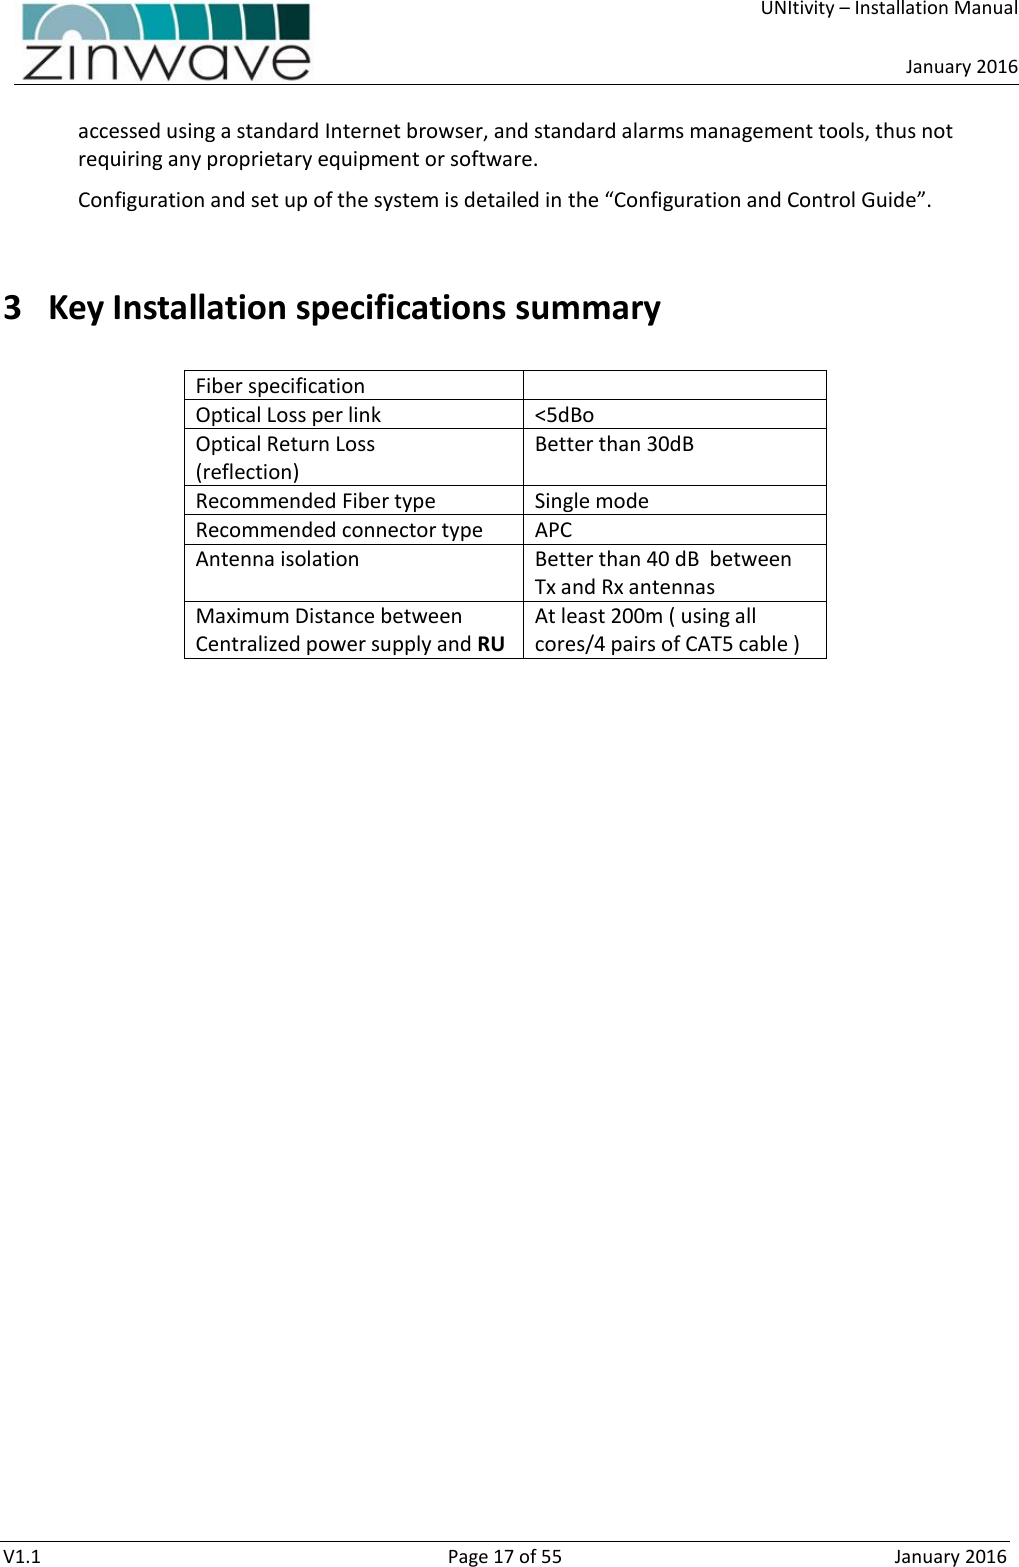     UNItivity – Installation Manual      January 2016  V1.1  Page 17 of 55  January 2016 accessed using a standard Internet browser, and standard alarms management tools, thus not requiring any proprietary equipment or software. Configuration and set up of the system is detailed in the “Configuration and Control Guide”.  3 Key Installation specifications summary  Fiber specification  Optical Loss per link &lt;5dBo Optical Return Loss  (reflection) Better than 30dB Recommended Fiber type Single mode Recommended connector type APC Antenna isolation Better than 40 dB  between Tx and Rx antennas Maximum Distance between Centralized power supply and RU At least 200m ( using all cores/4 pairs of CAT5 cable )    